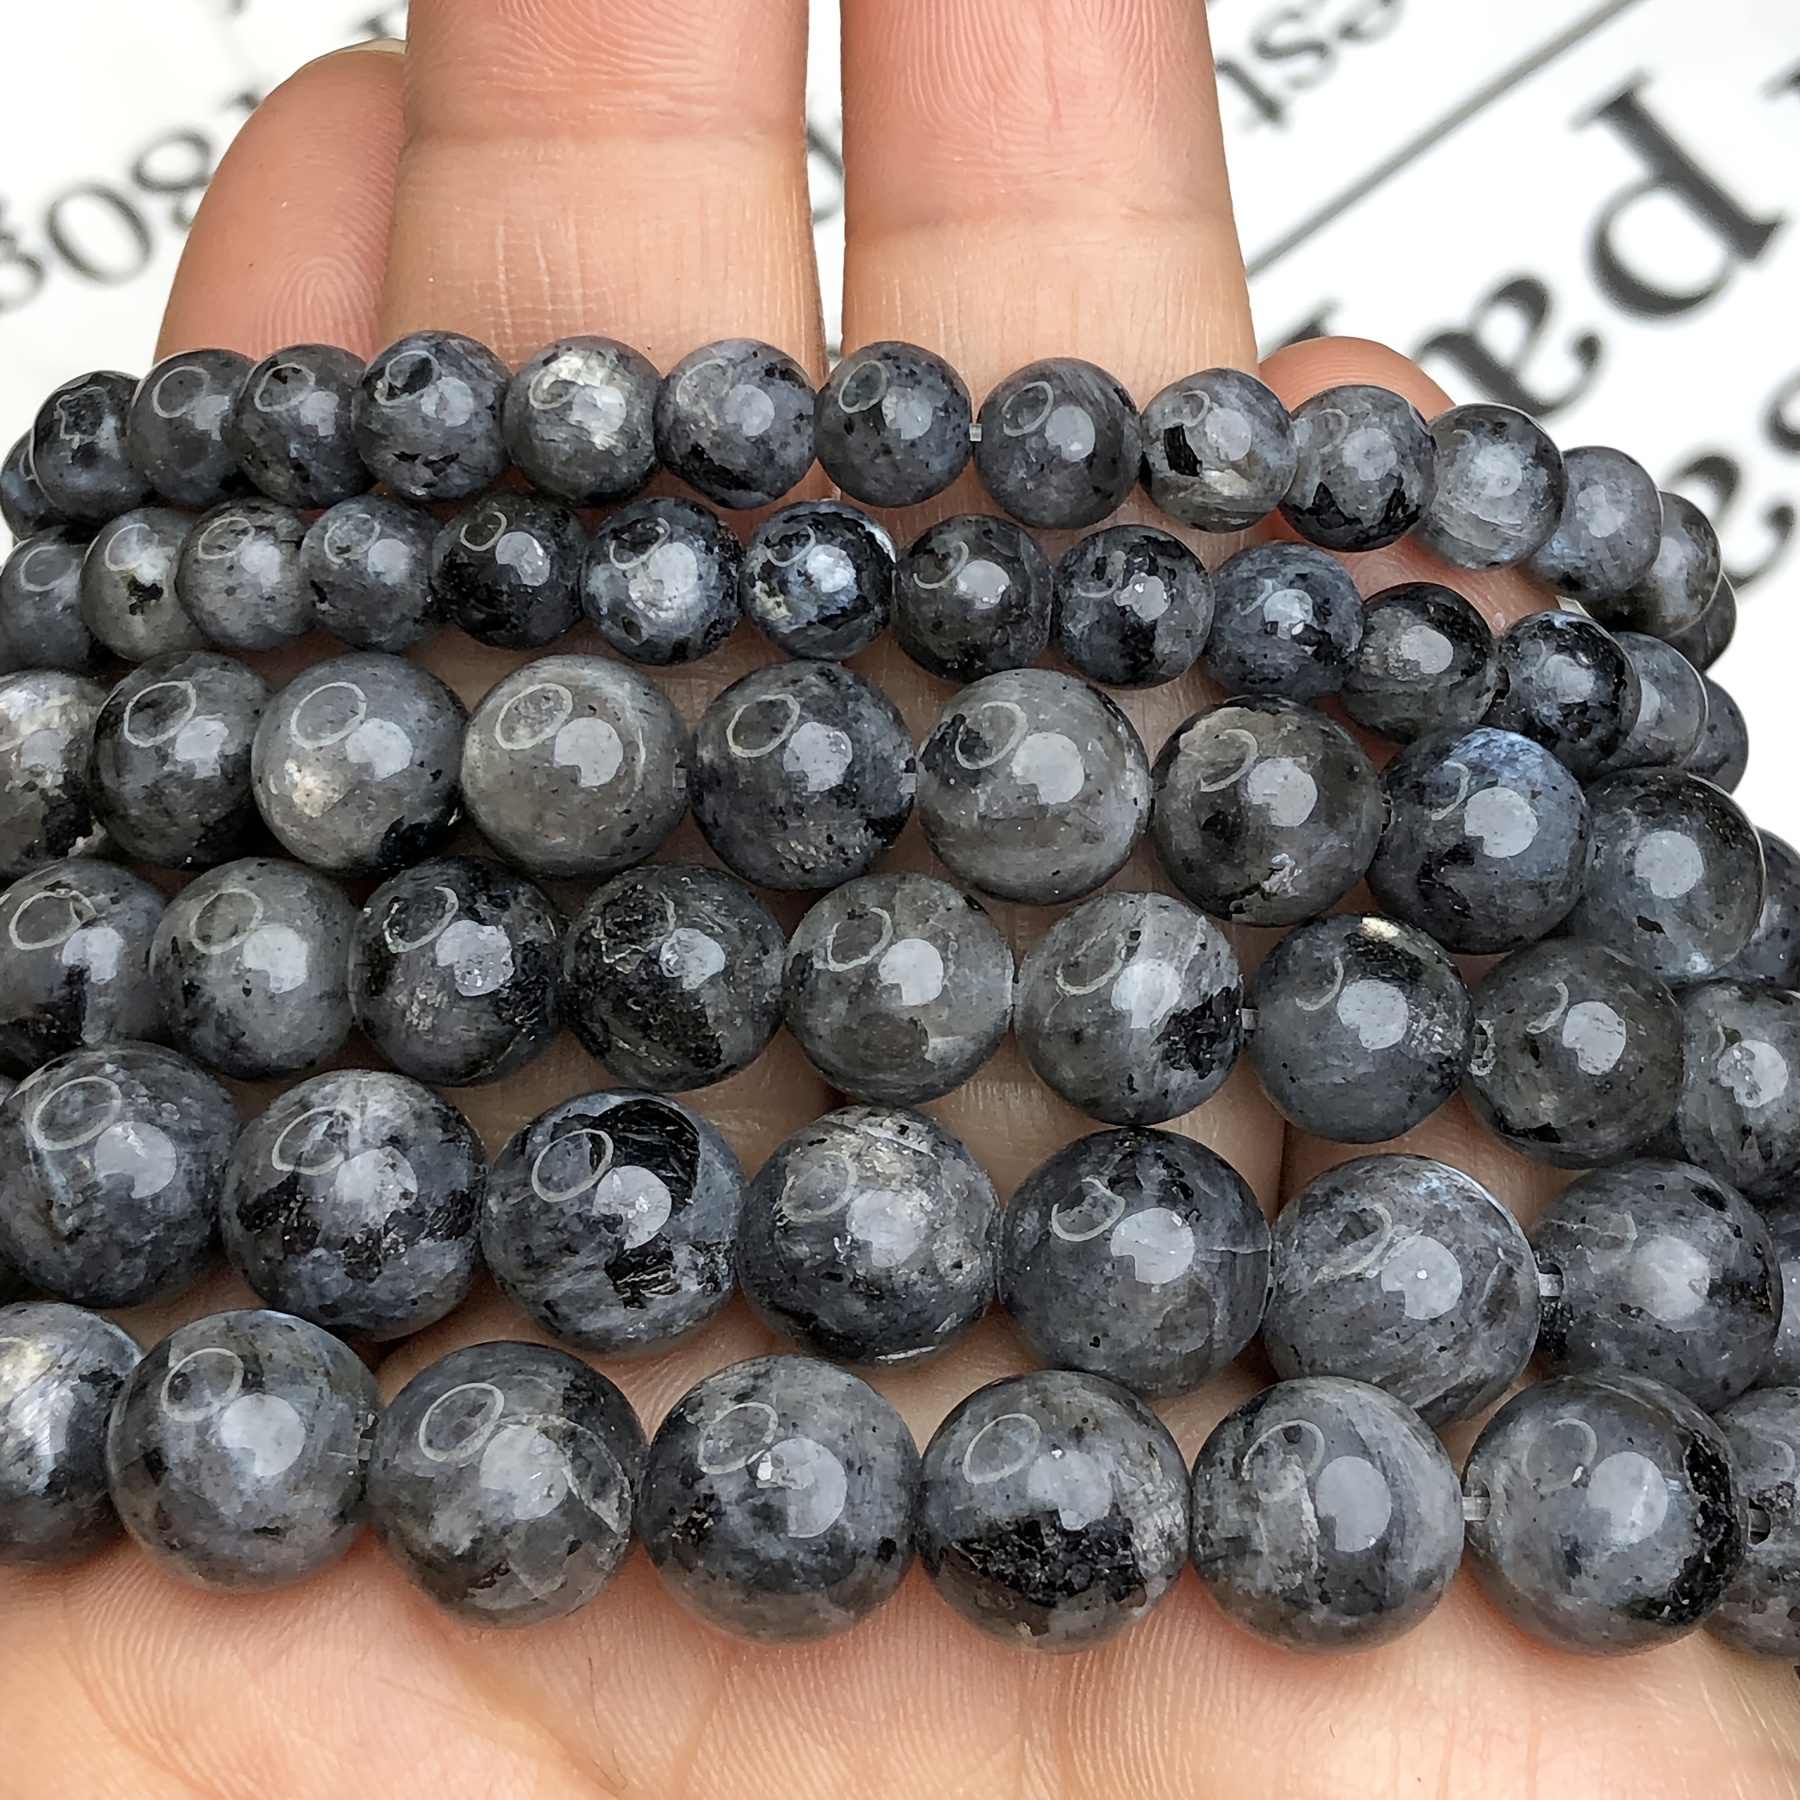 Cheap Natural Black Hematite Stone Loose Beads for Jewelry Making Stand  15'' 2/3/4/6/8/10/12mm